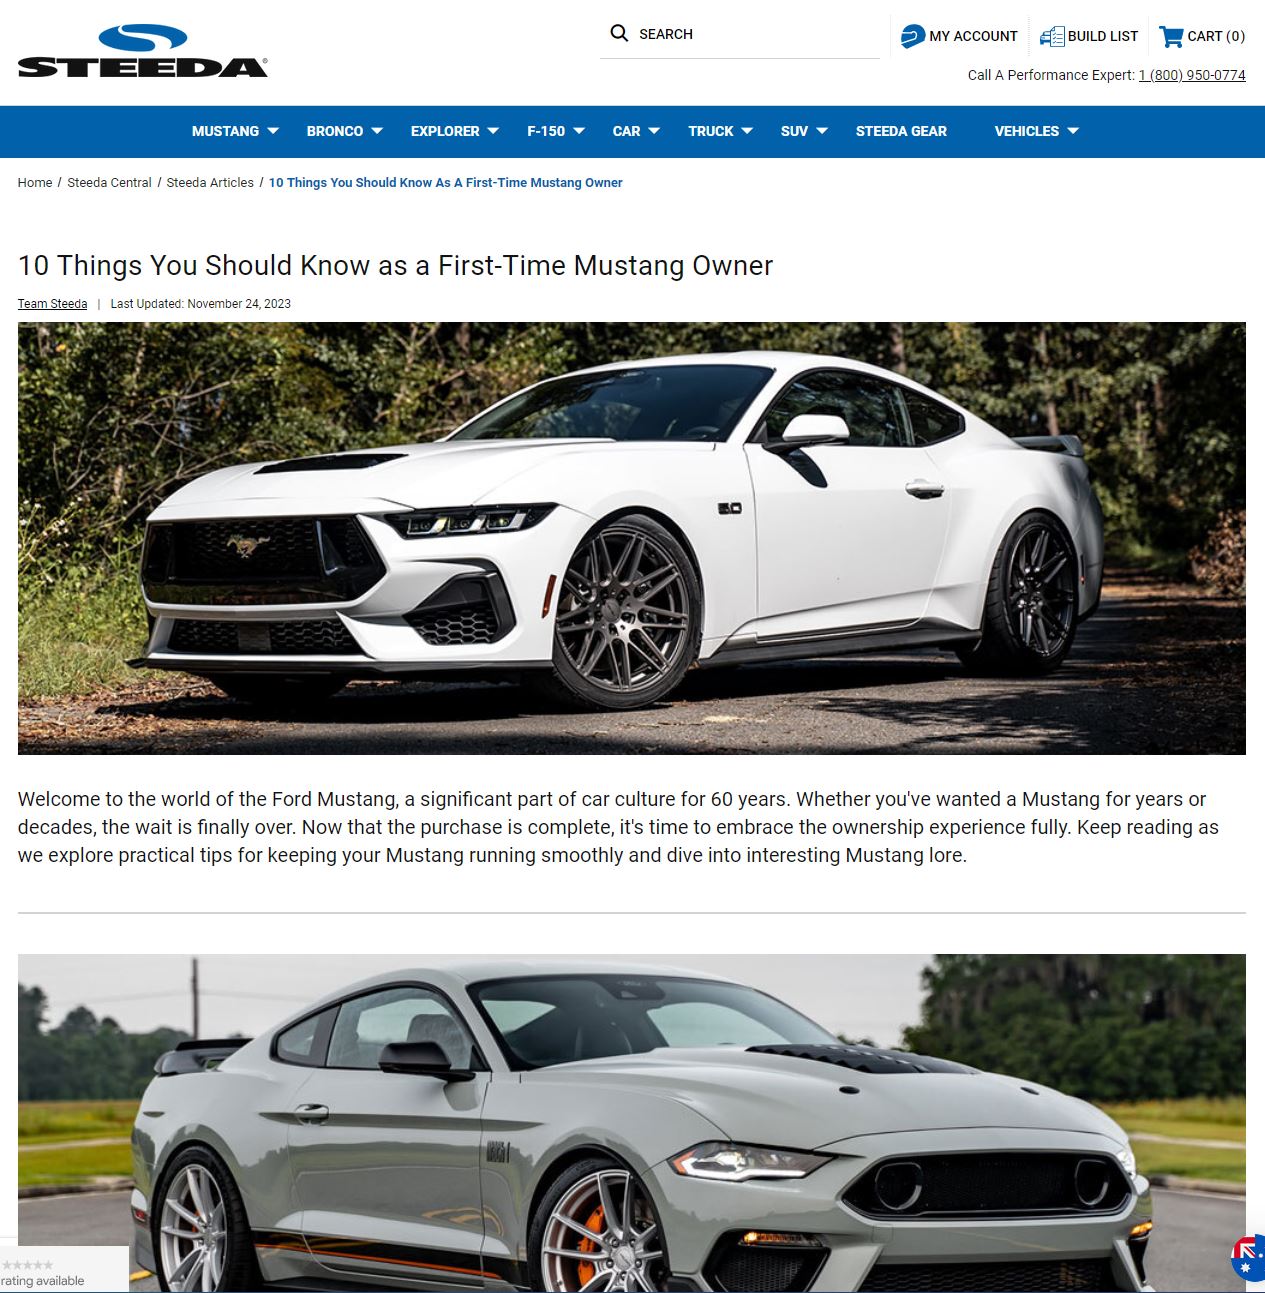 S650 Mustang Steeda: 10 Things You Should Know as a First-Time Mustang Owner Capture.JPG